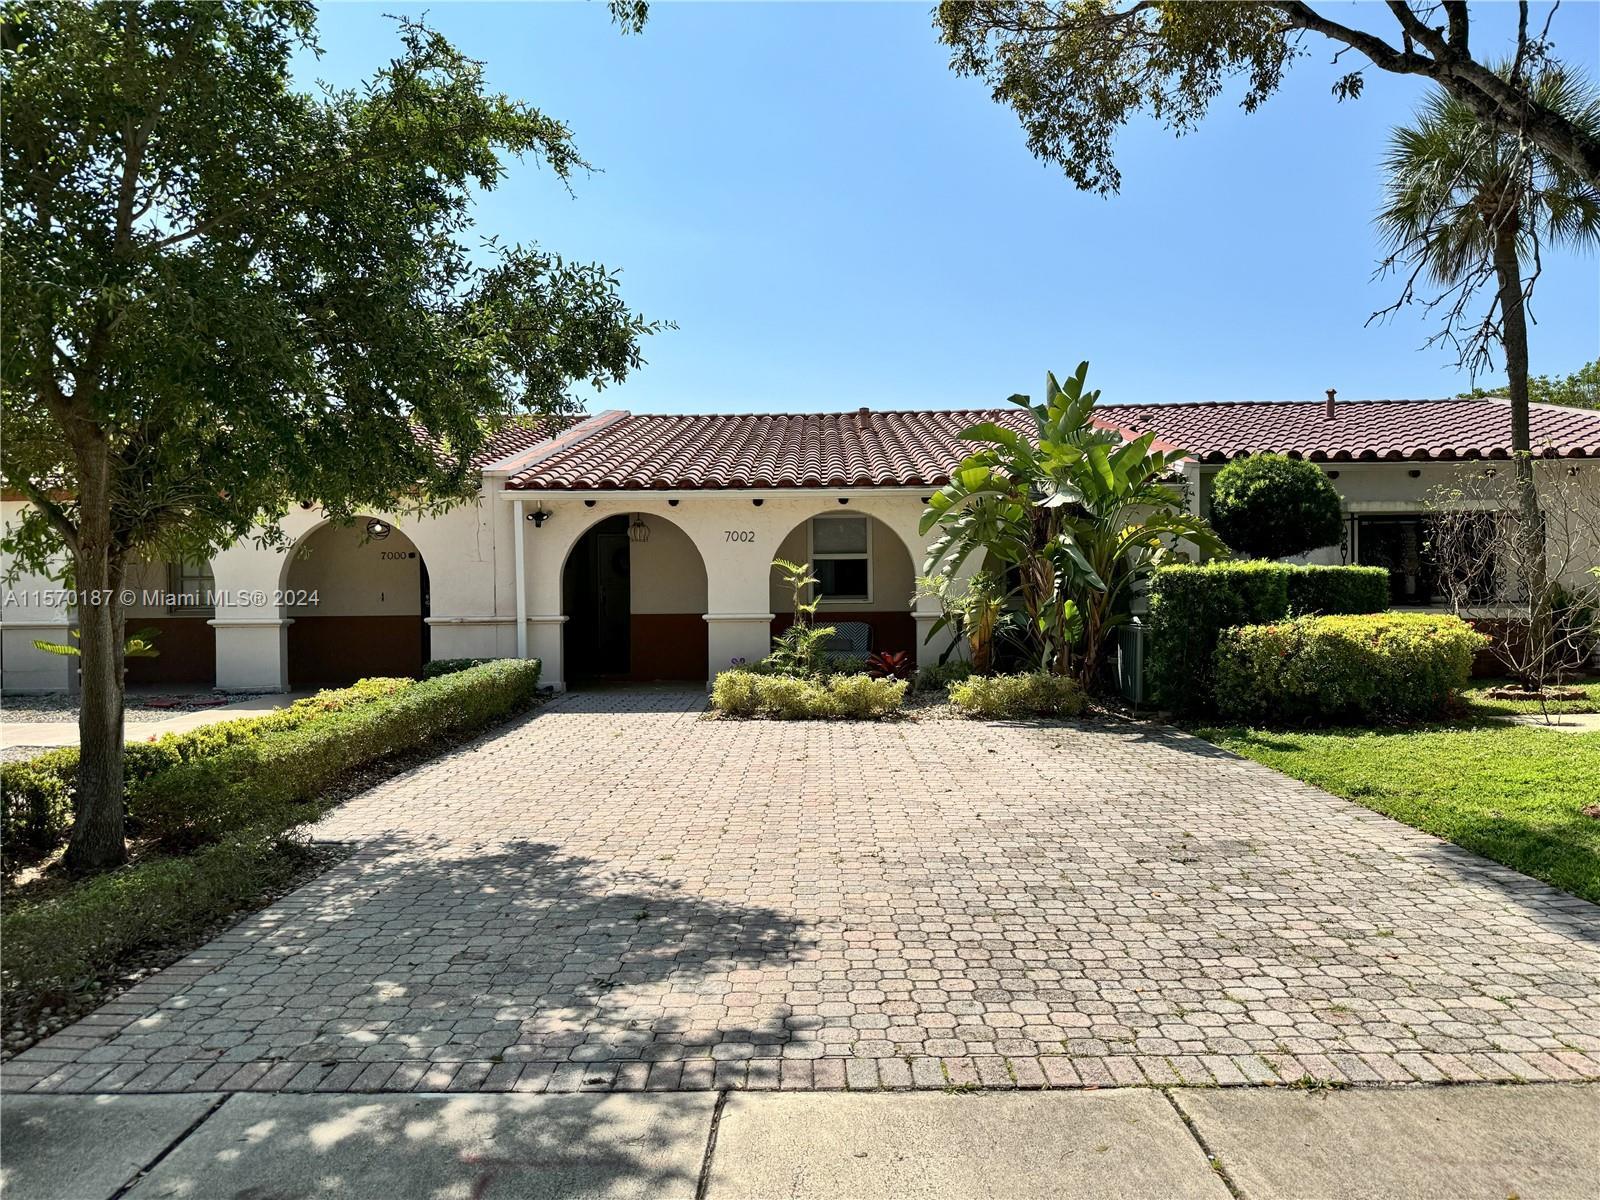 Photo of 7002 Holly Rd in Miami Lakes, FL